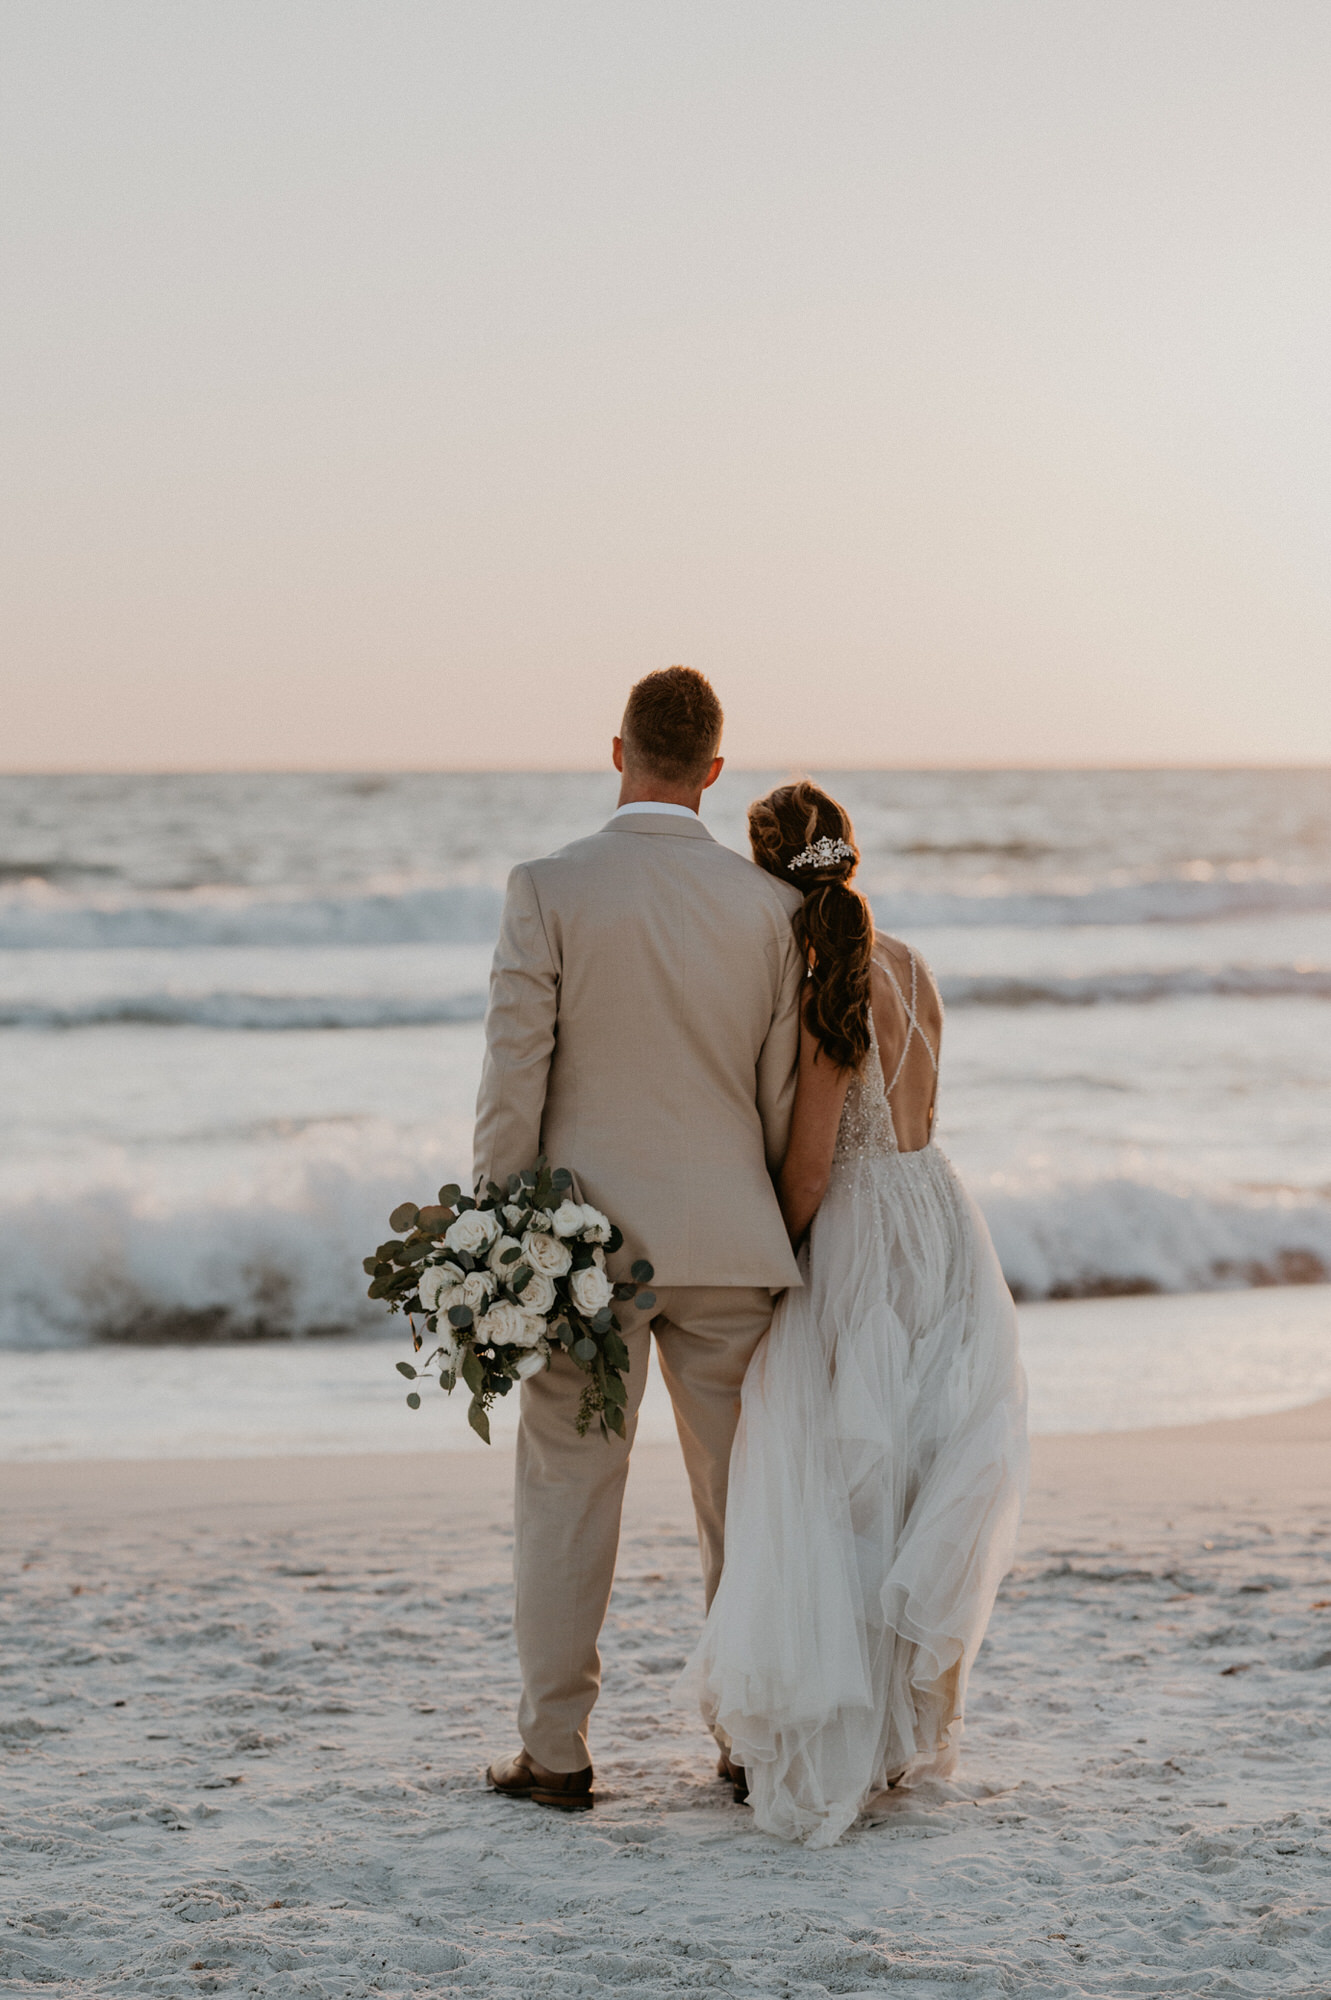 5 Reasons to get married in Florida